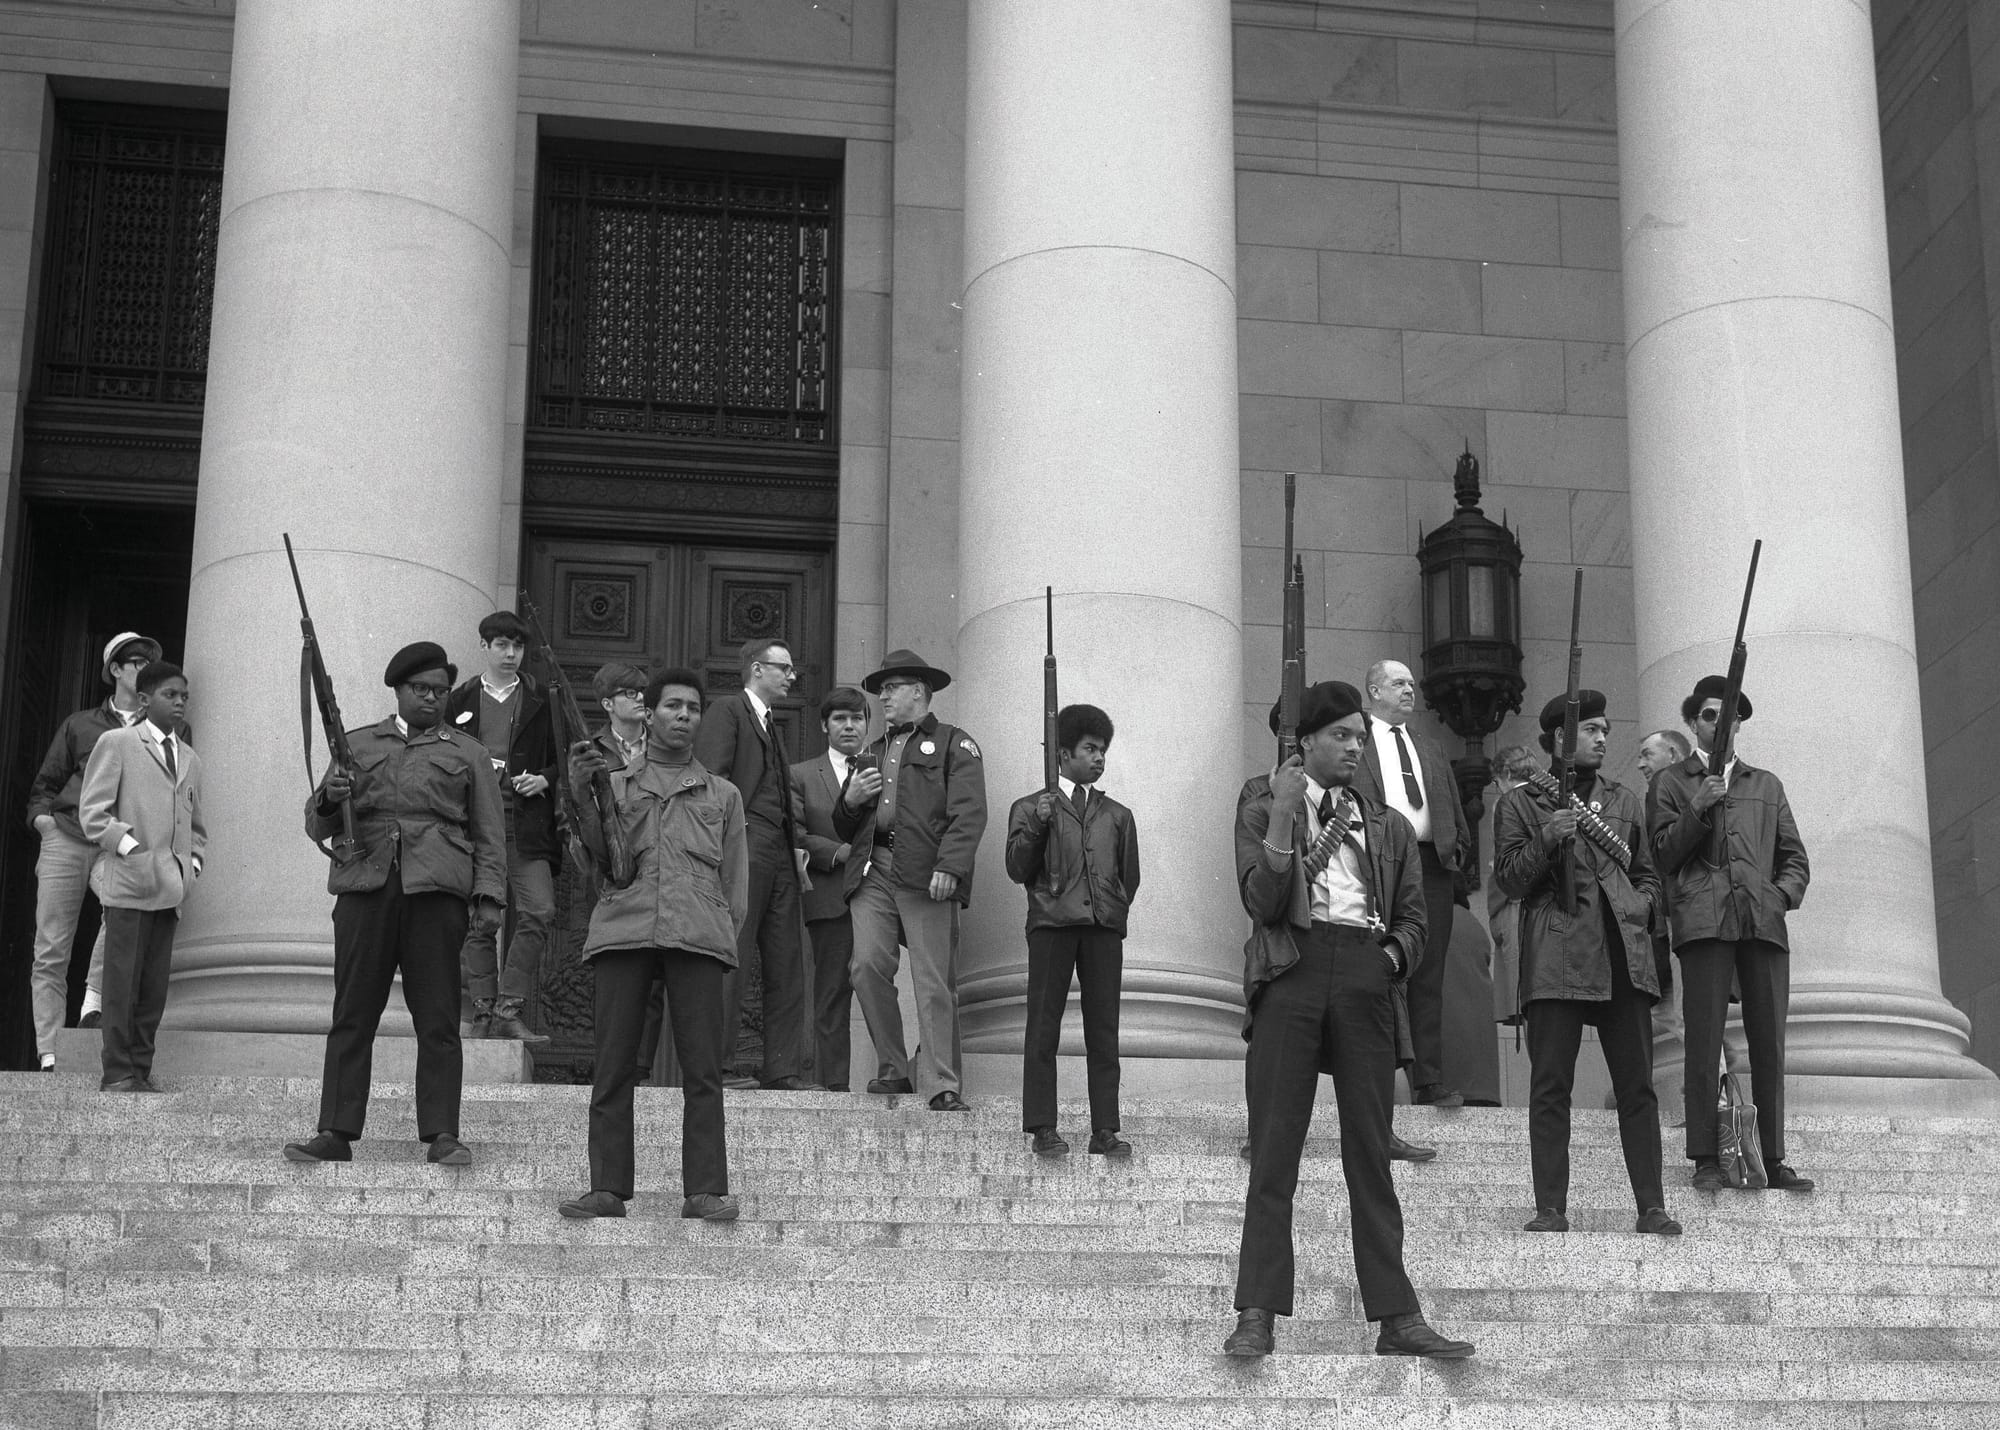 Armed members of the Seattle chapter of the Black Panther Party stand on the steps of the state capitol in Olympia, Washington, 1969